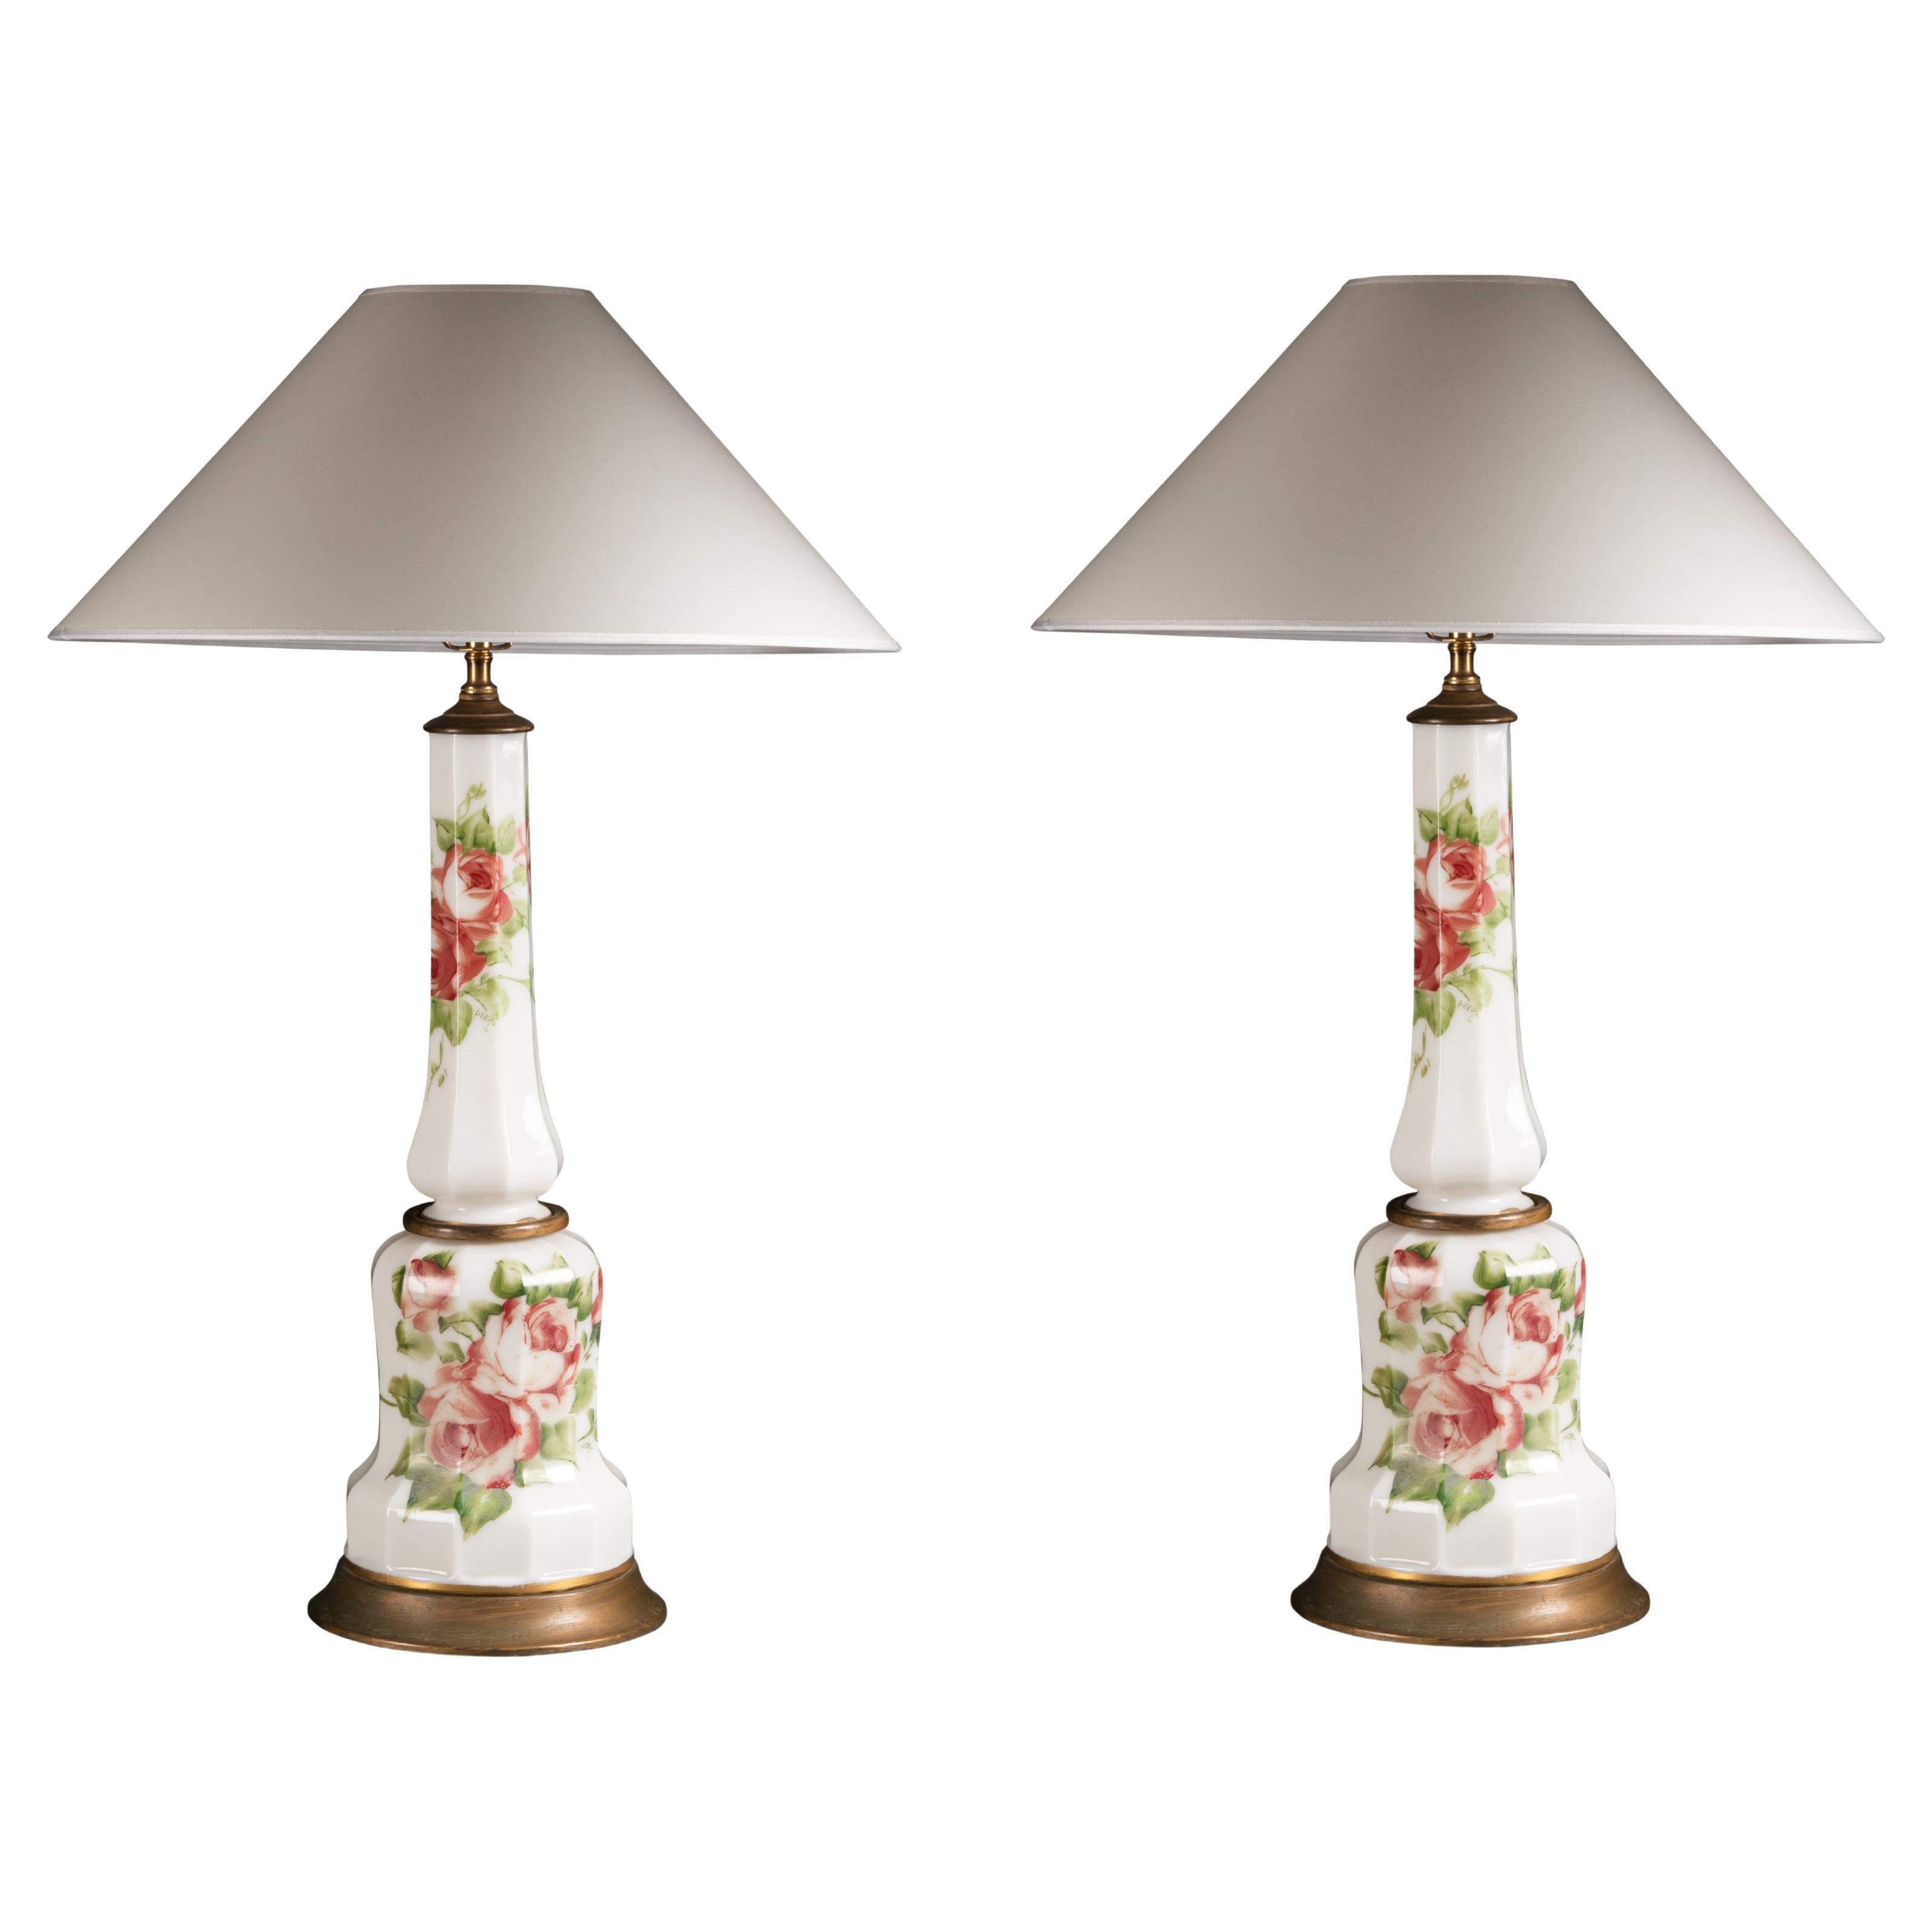 Pair of White Overlay Glass Lamps with Hand Painted Roses, Circa 1920